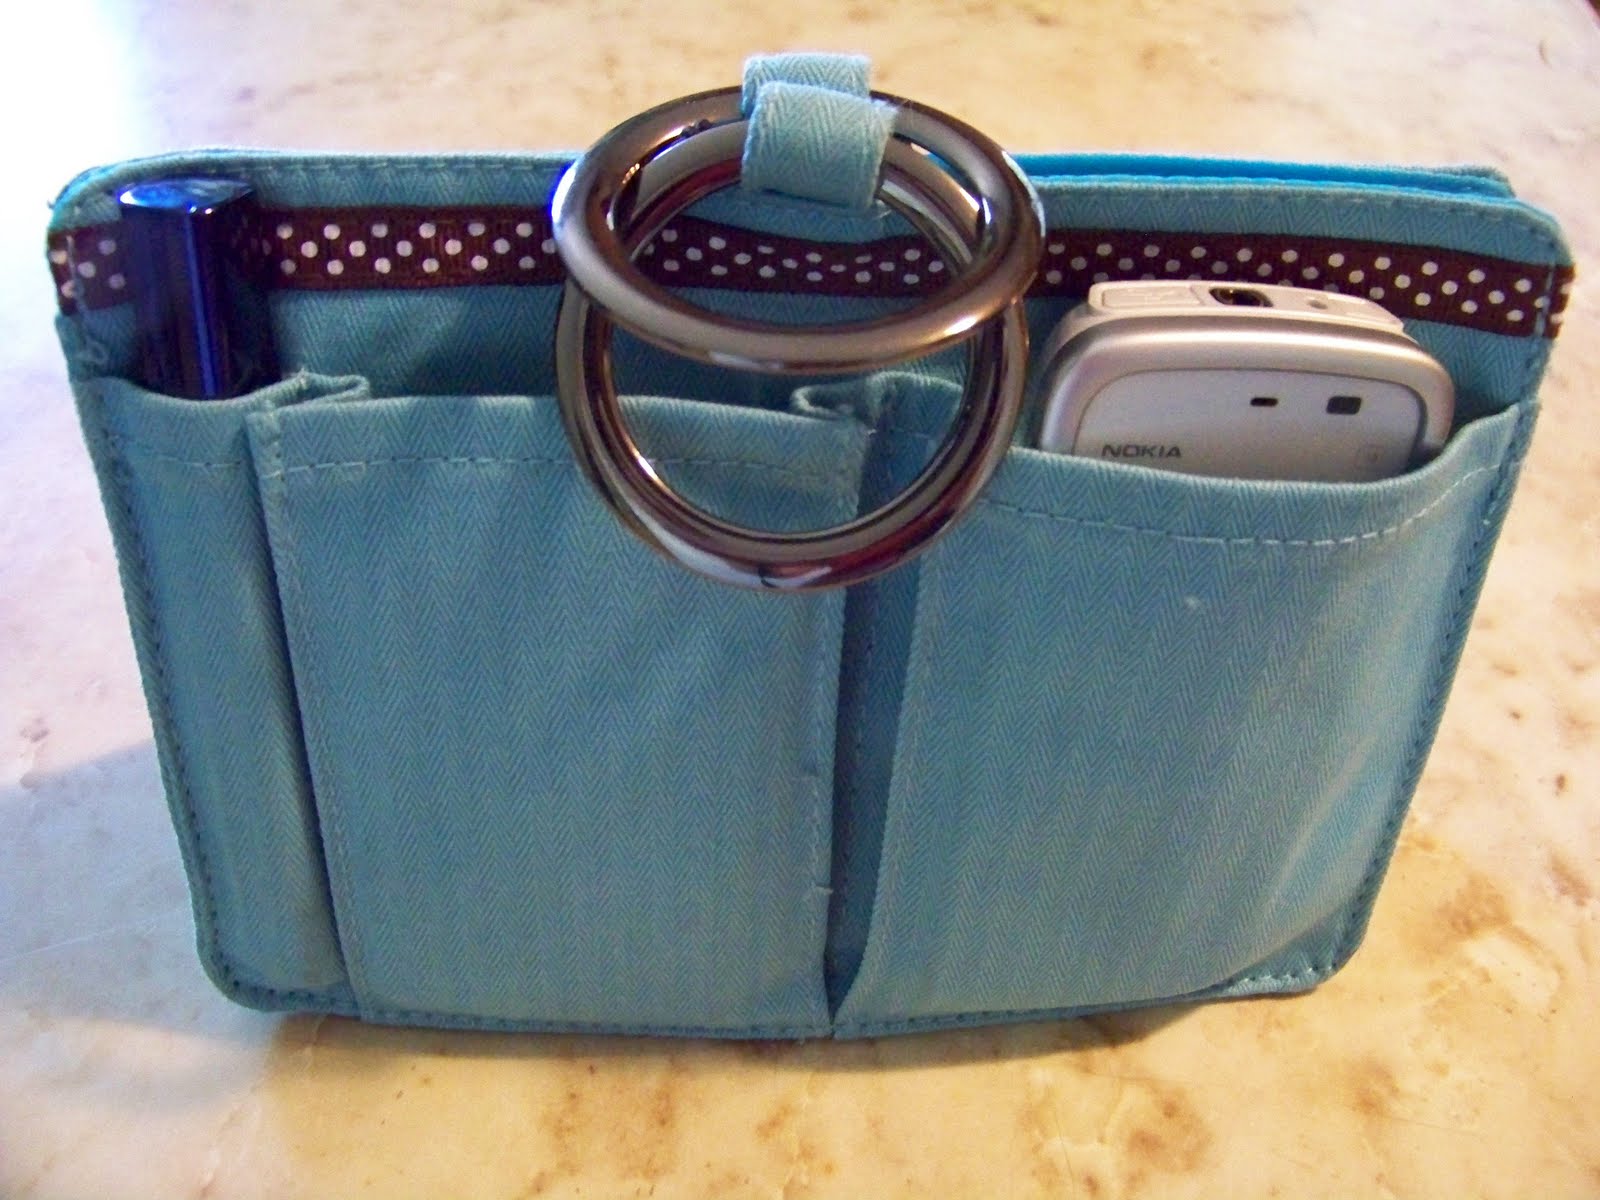 Pouchee Cotton Teal Purse Organizer Review & Giveaway (ARV $24.40) - The Adventures of Paul ...